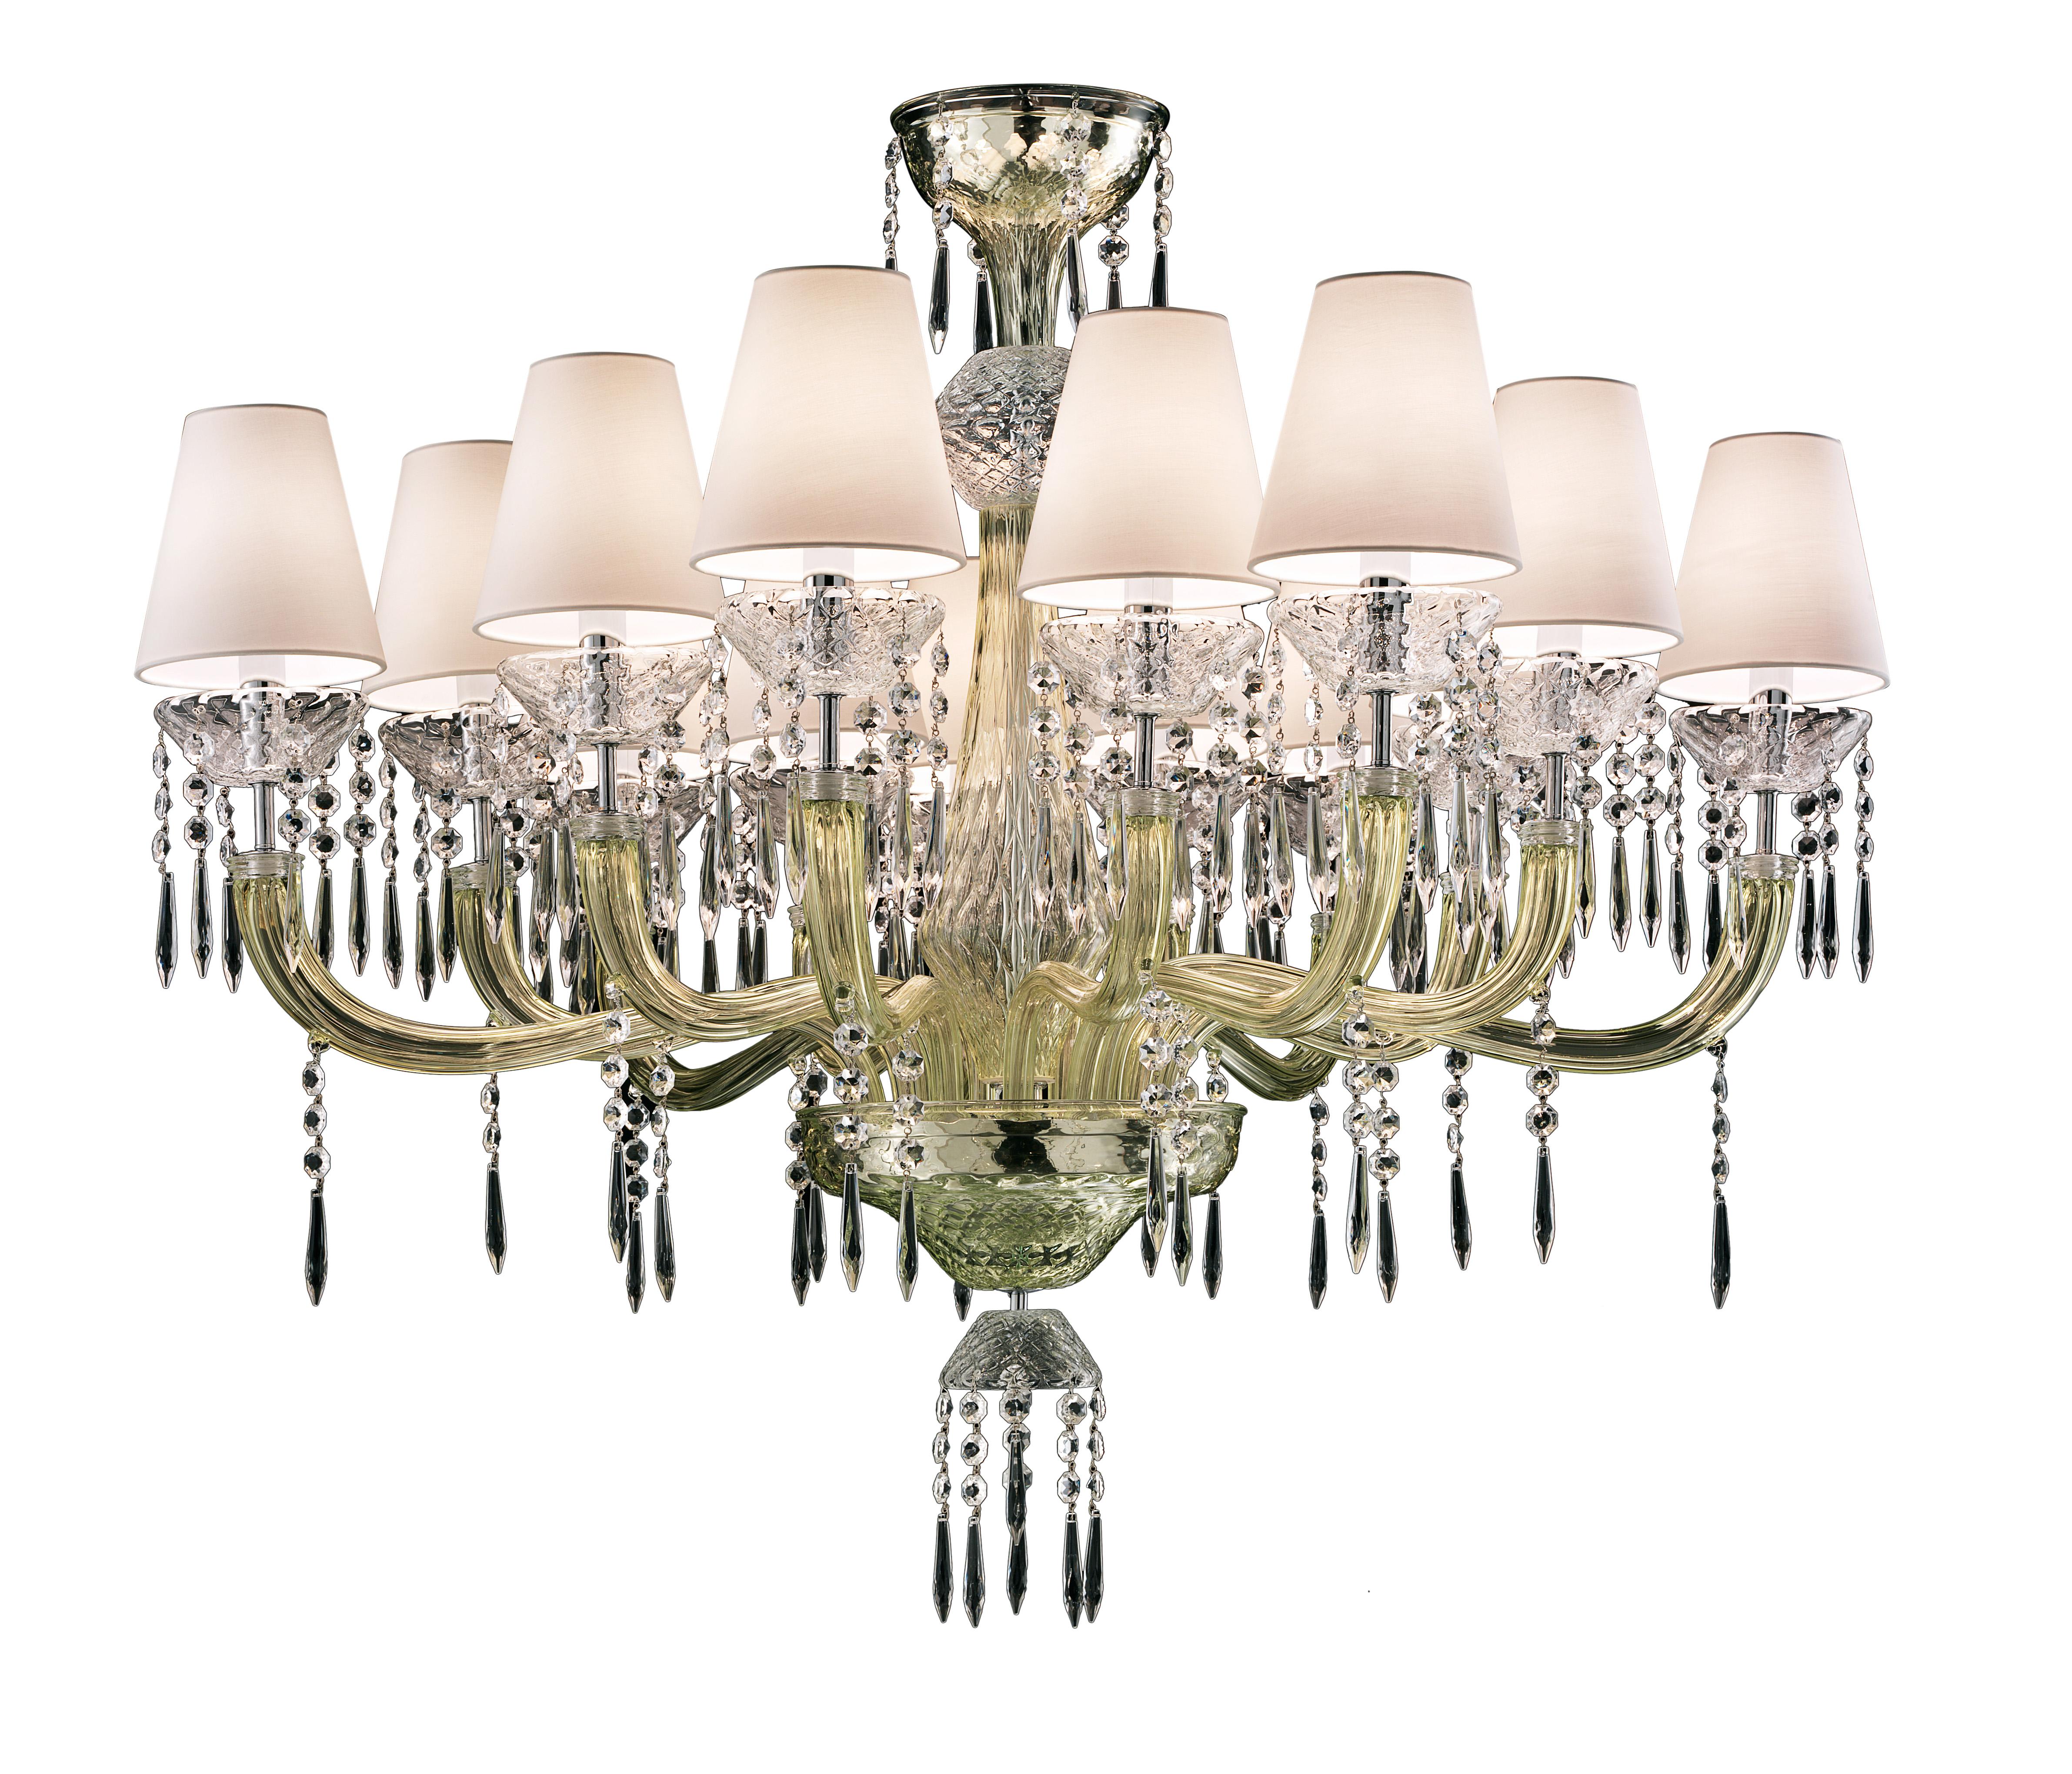 Green (Liquid Citron_EL) President 5695 14 Chandelier in Glass with White Shade, by Barovier & Toso